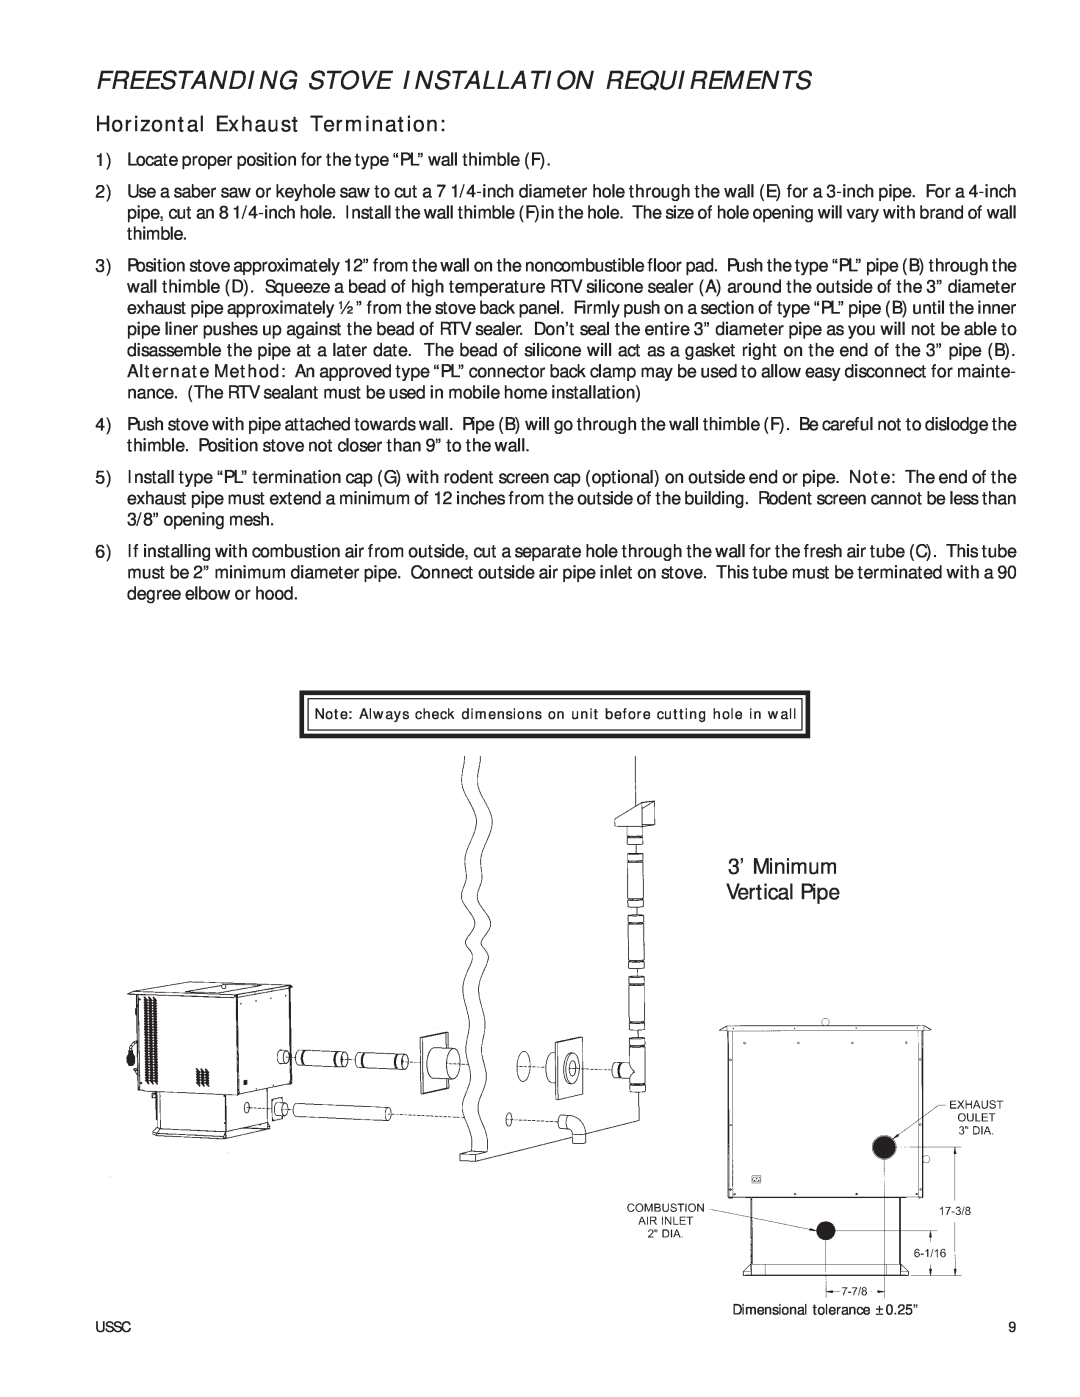 United States Stove 6037 owner manual Freestanding Stove Installation Requirements, Horizontal Exhaust Termination 